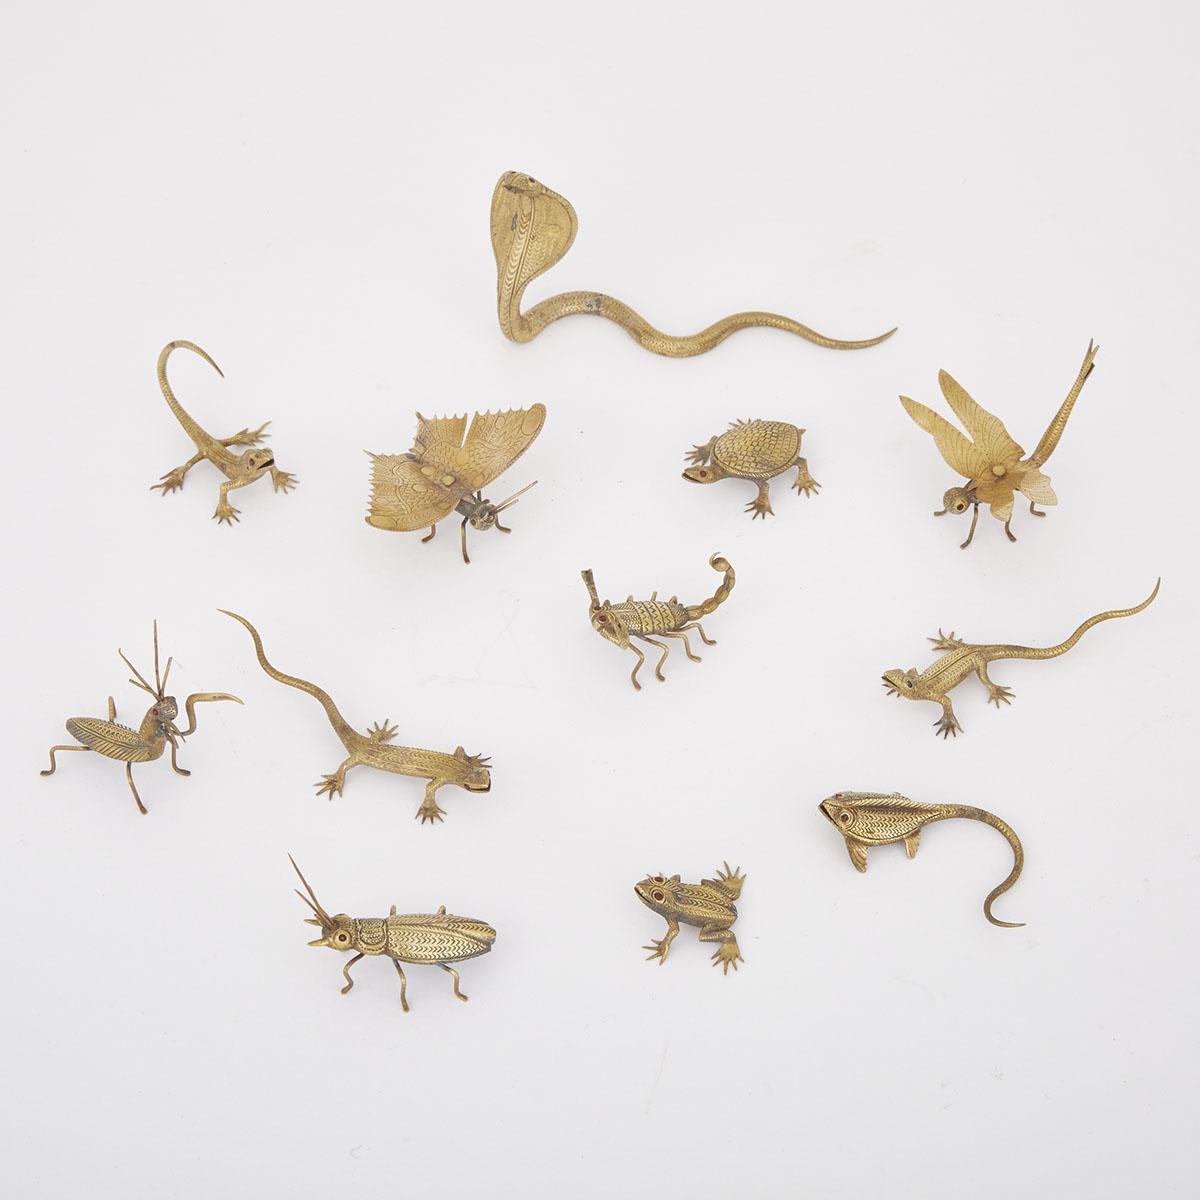 SET OF 12 AUSTRIAN GILT BRONZE REPTILE AND INSECT FORM PLACE CARD HOLDERS, MID 19TH CENTURYeach